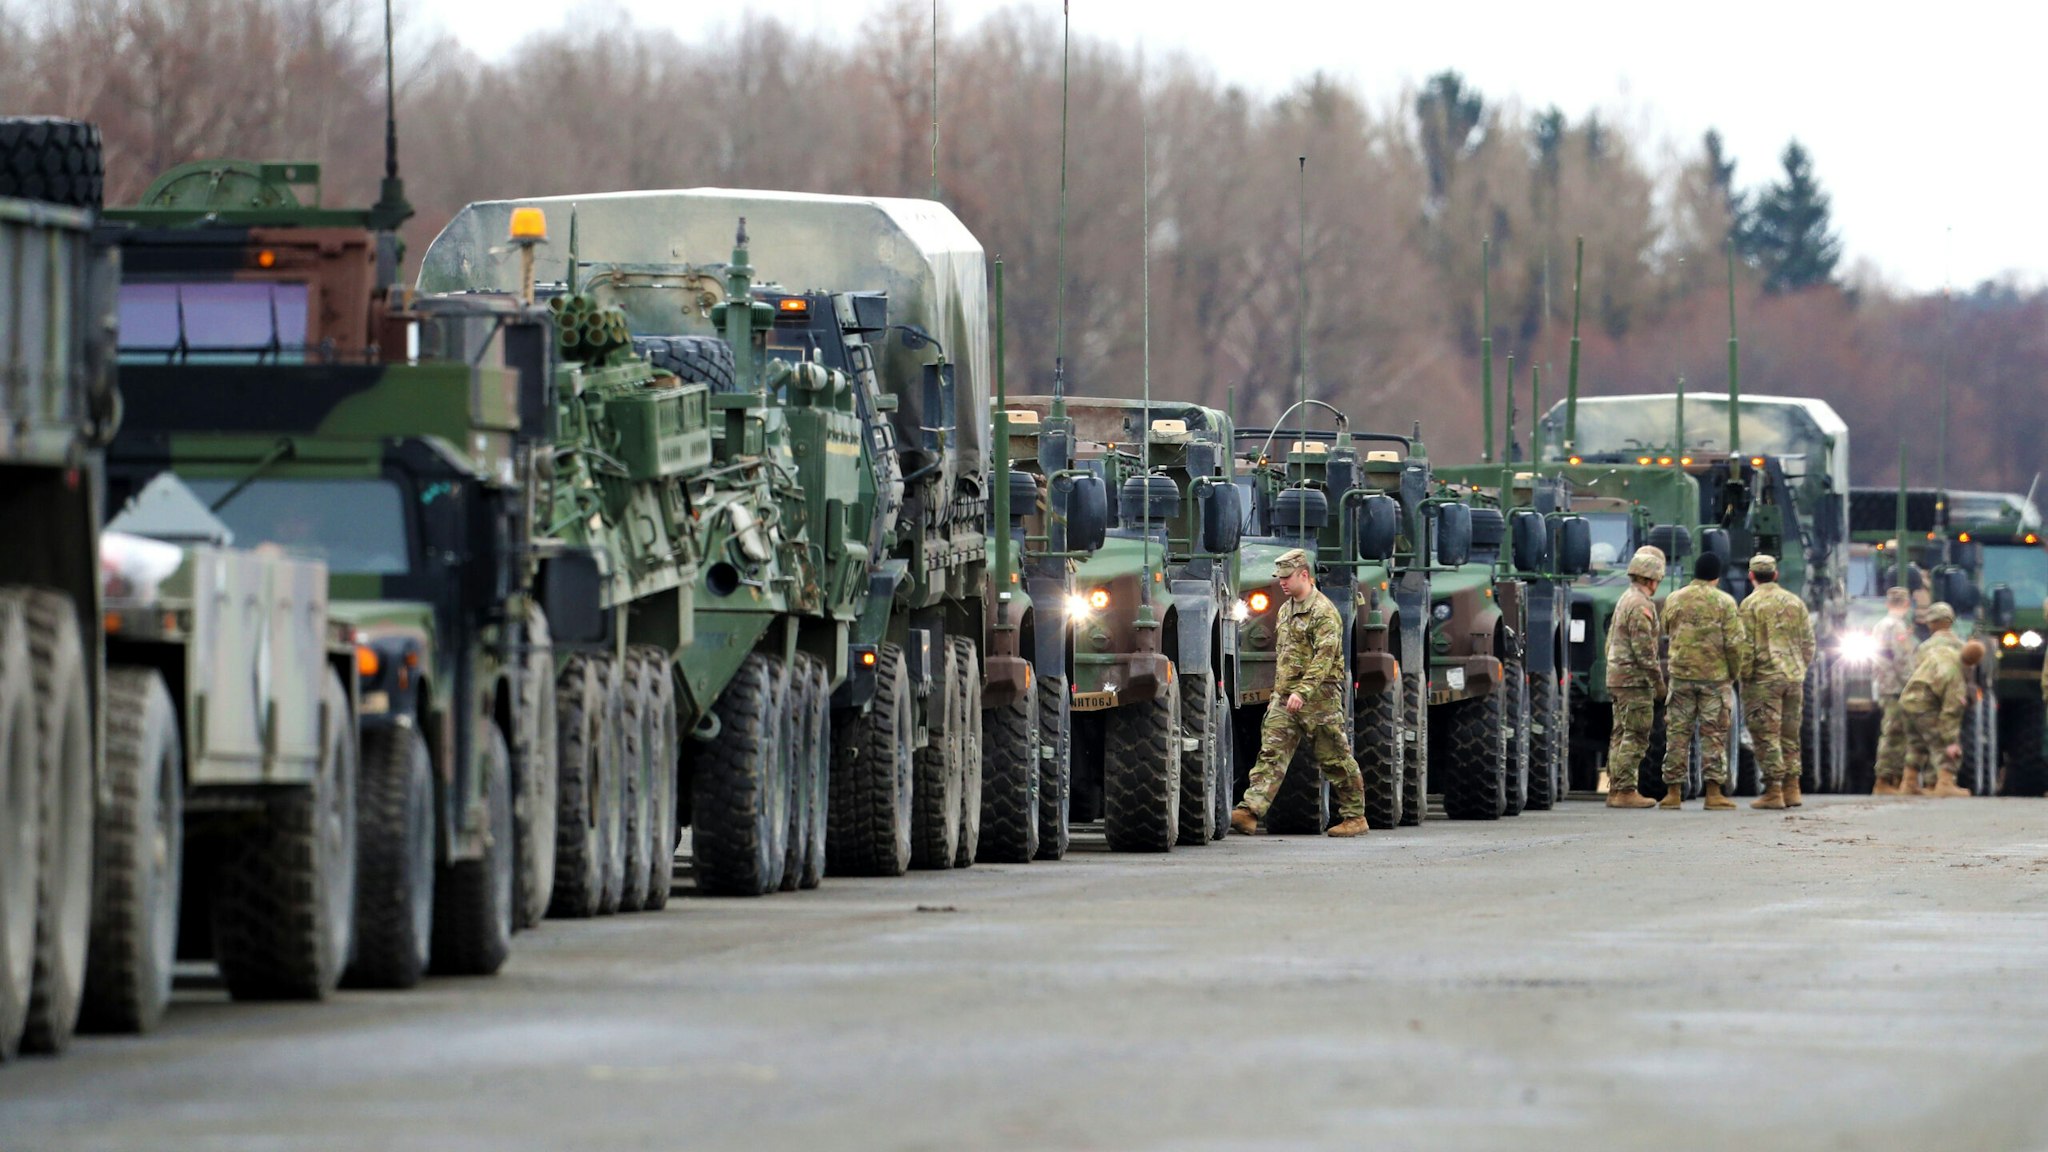 VILSECK, GERMANY - FEBRUARY 09: Soldiers of 2nd Squadron, 2nd Cavalry Regiment of the U.S. Army are pictured during the preparation of armoured combat vehicles before deploying to Romania on February 09, 2022 in Vilseck, Germany. The troops will join other US troops already there as part of a coordinated deployment of NATO forces across eastern Europe. The effort is part of NATO's response to the large-scale build up of Russian troops on the border to Ukraine, which has caused international fears of an imminent Russian military invasion.